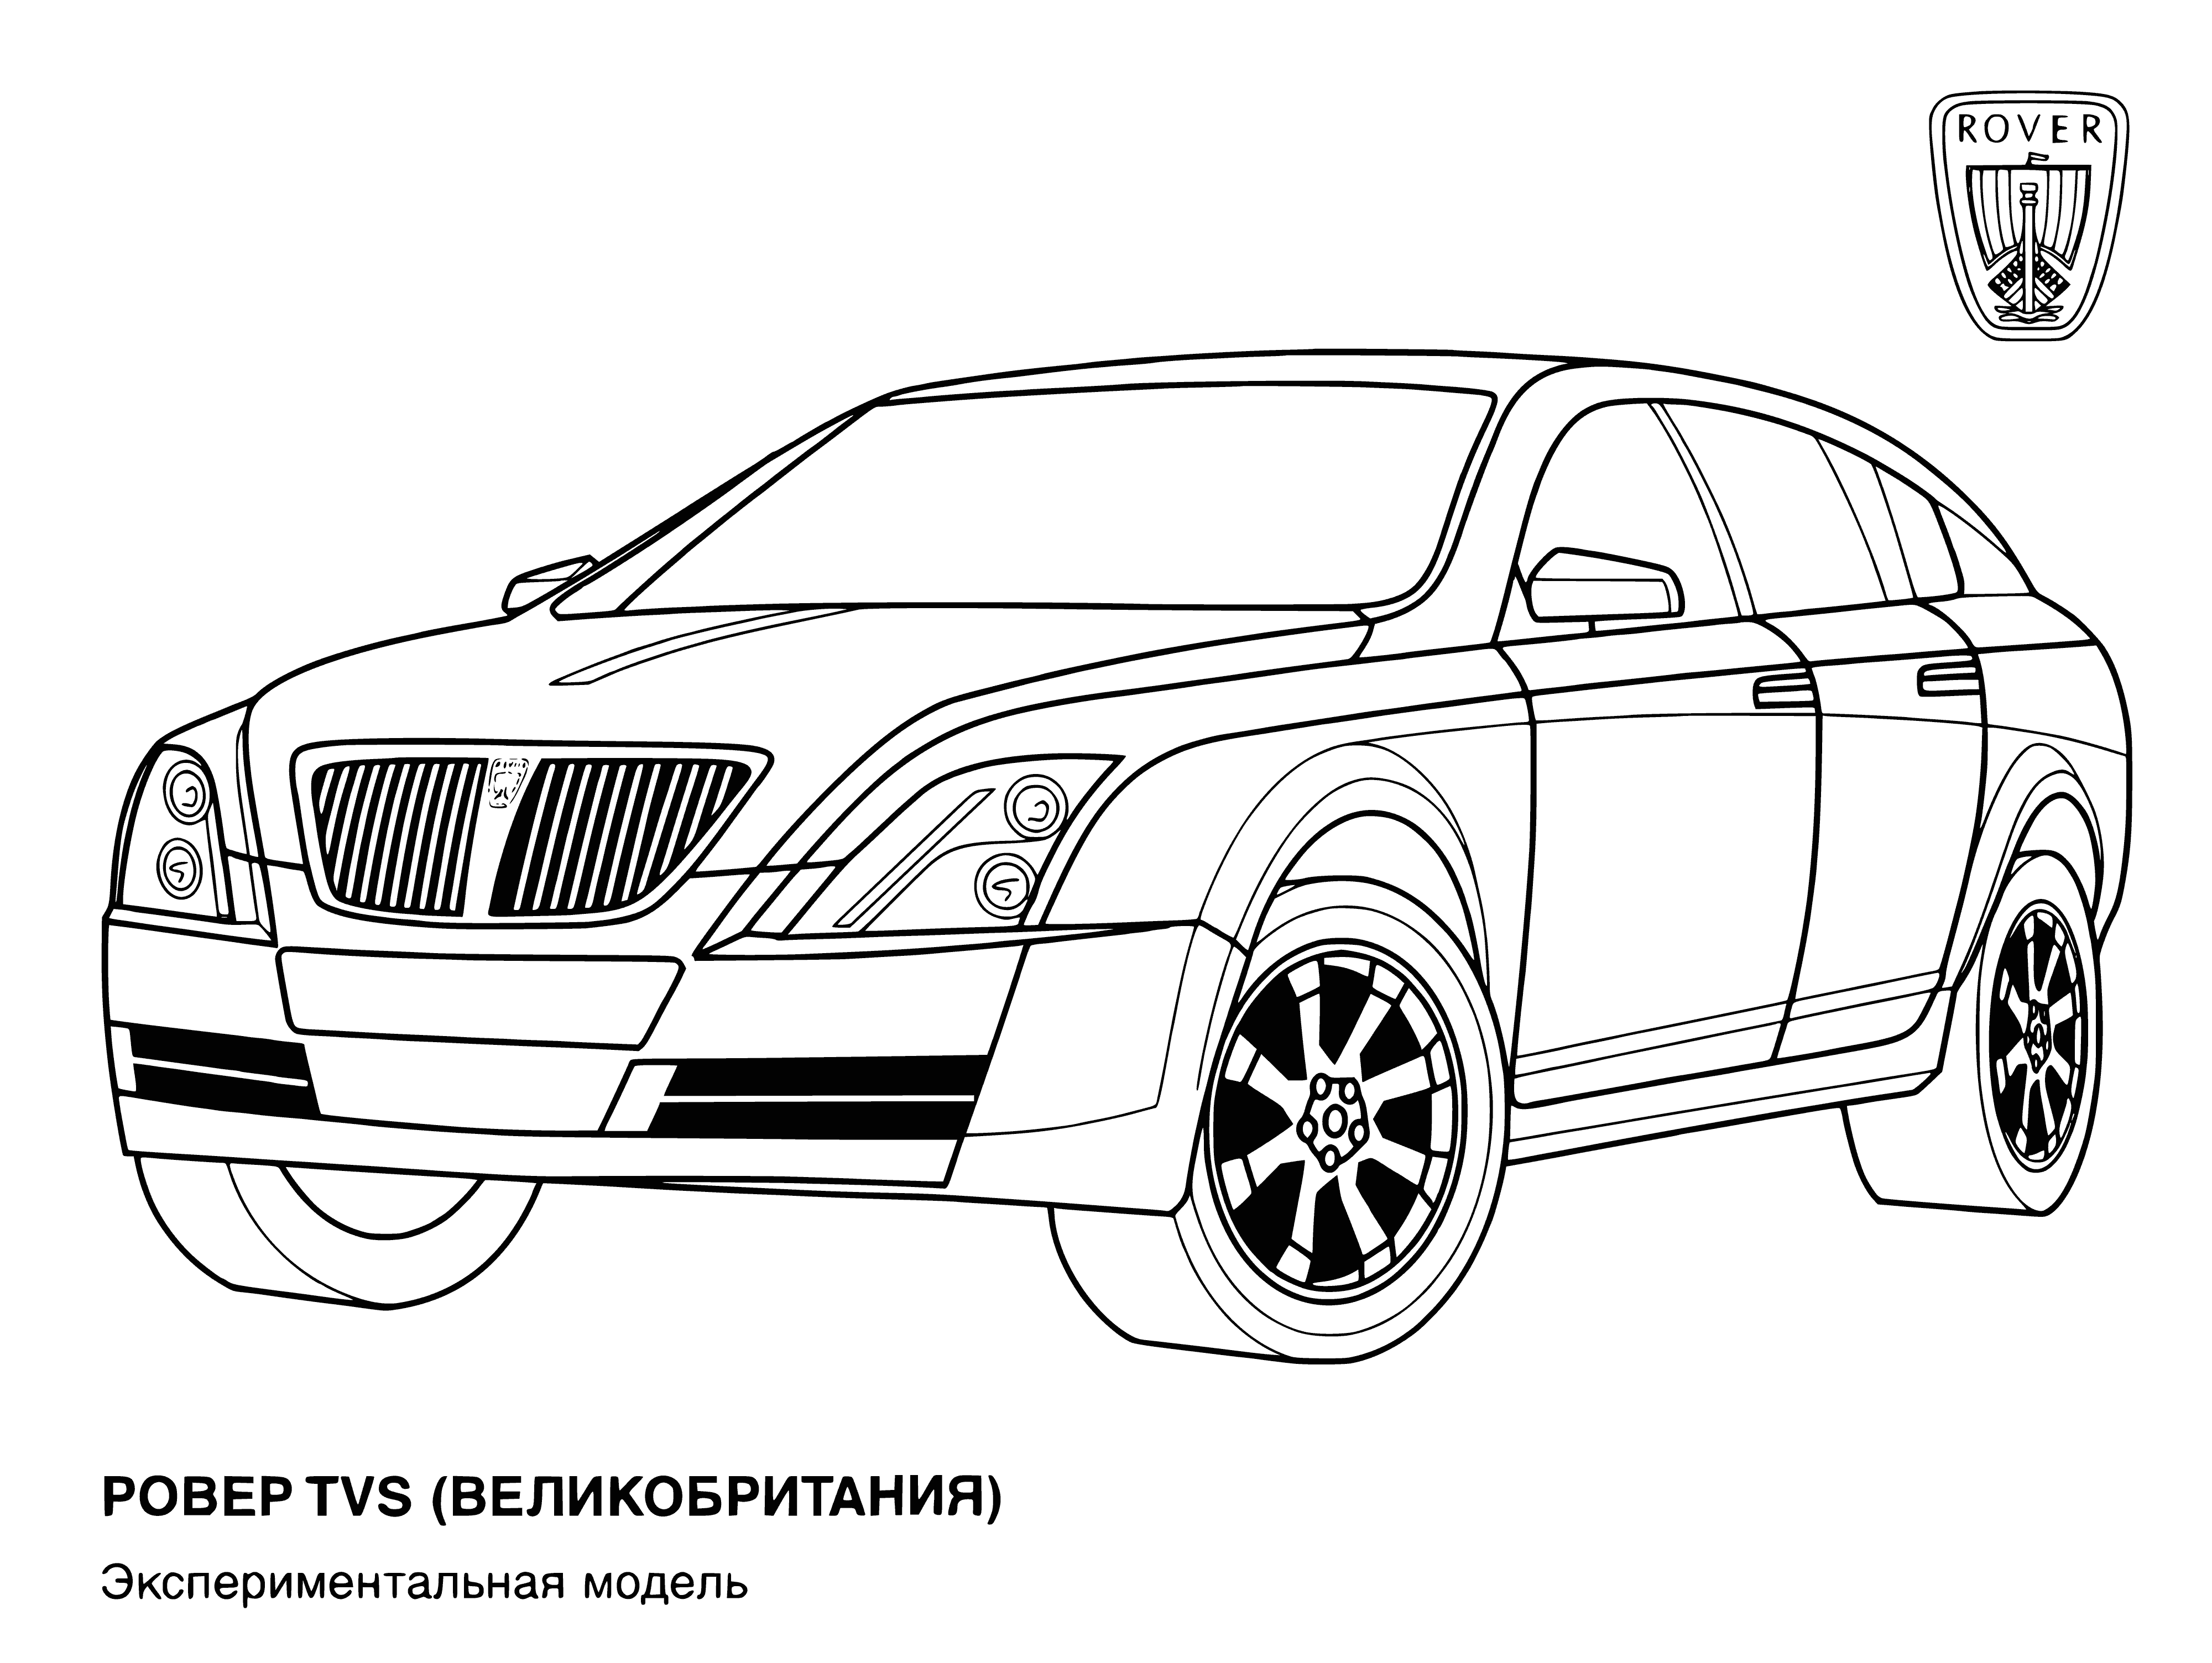 Rover (UK) coloring page